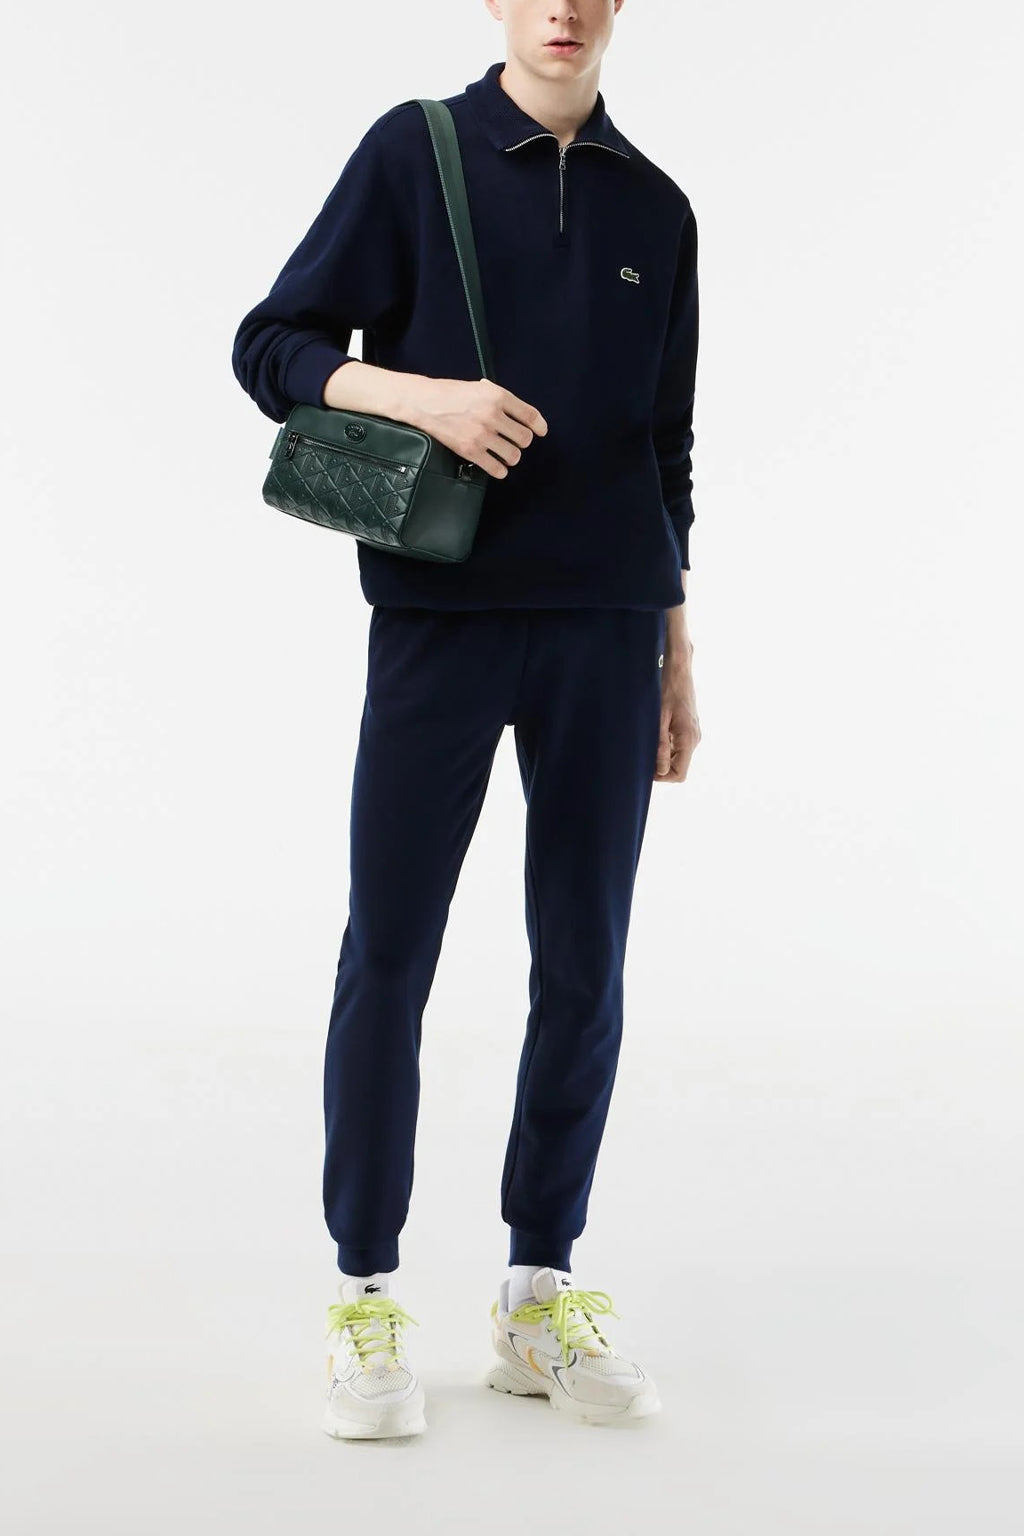 Lacoste - Cotton Sweatshirt With a Stand-up Zipper